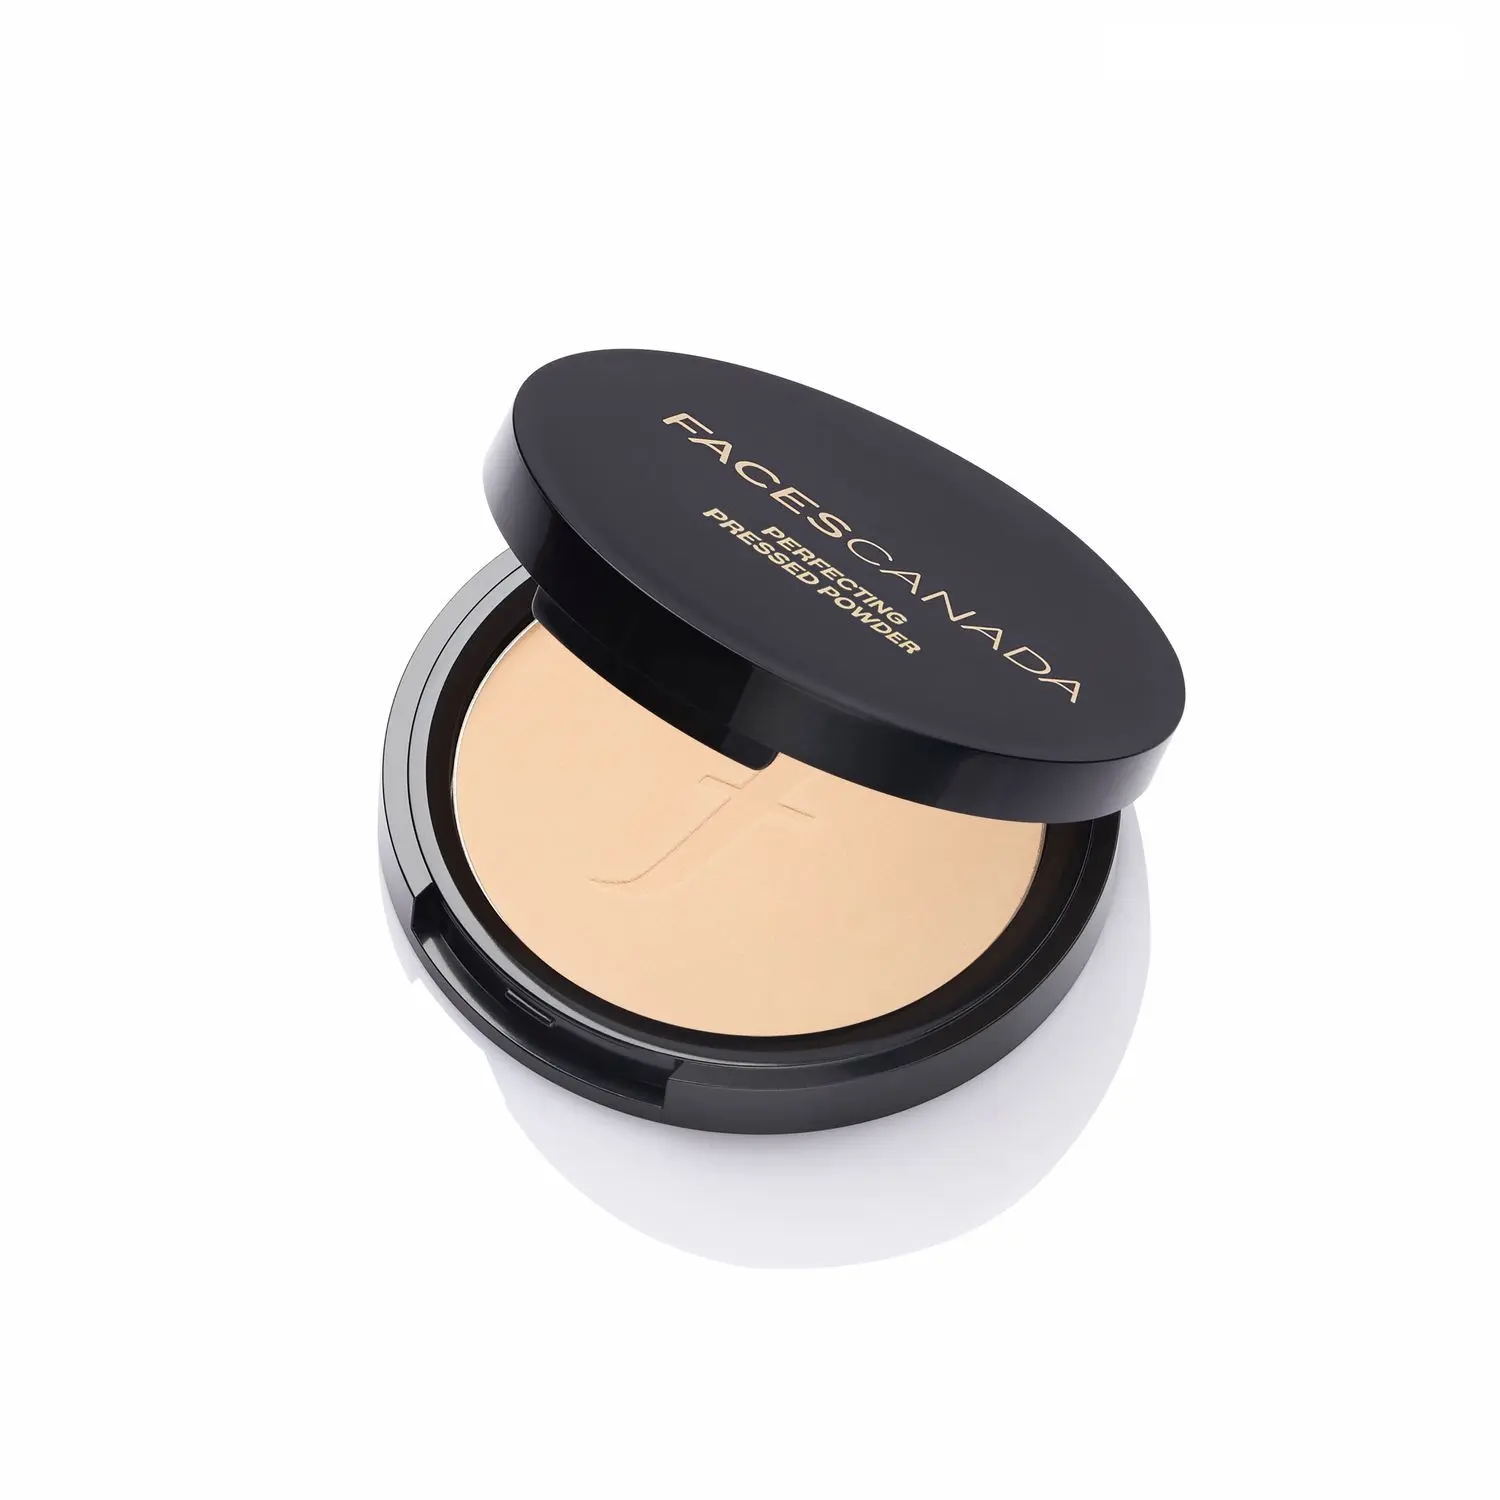 Faces Canada Perfecting Pressed Powder - Ivory 01 (9 g)